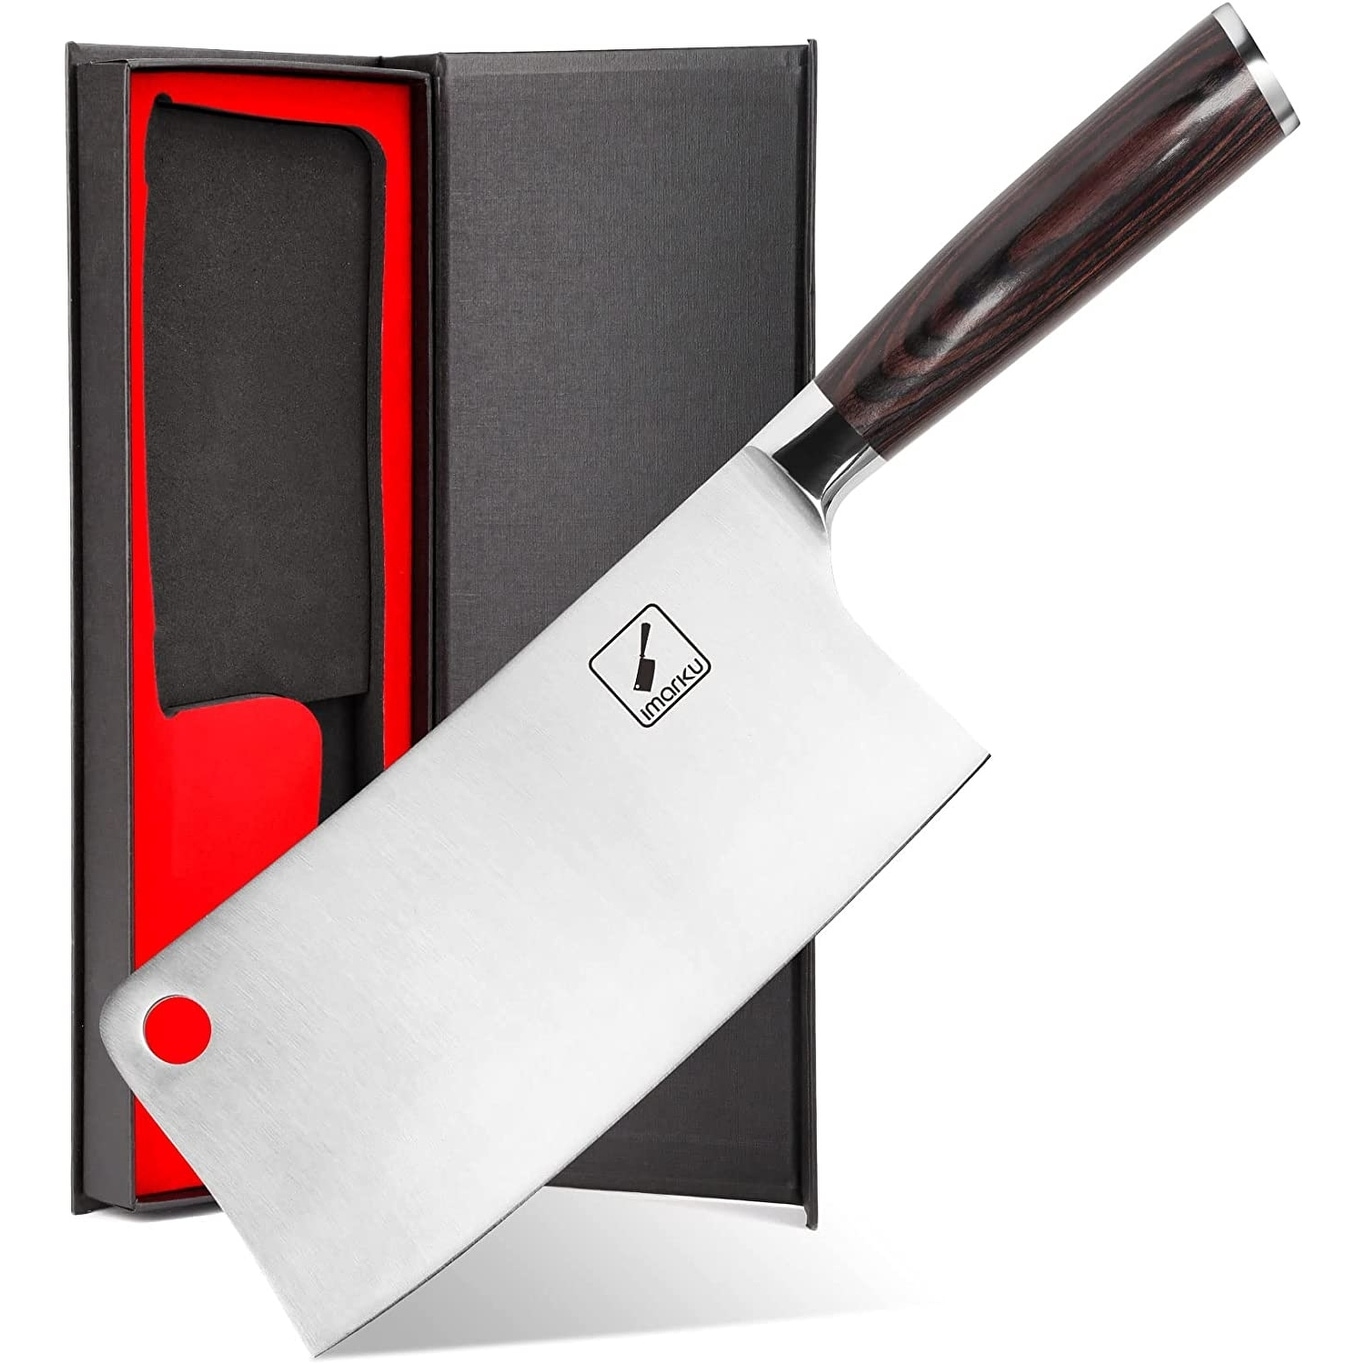 https://ak1.ostkcdn.com/images/products/is/images/direct/94787379cb8204a32b5f6bb5a3371bf8bd21997c/imarku-Cleaver-Knife---7-Inch-Meat-Cleaver.jpg